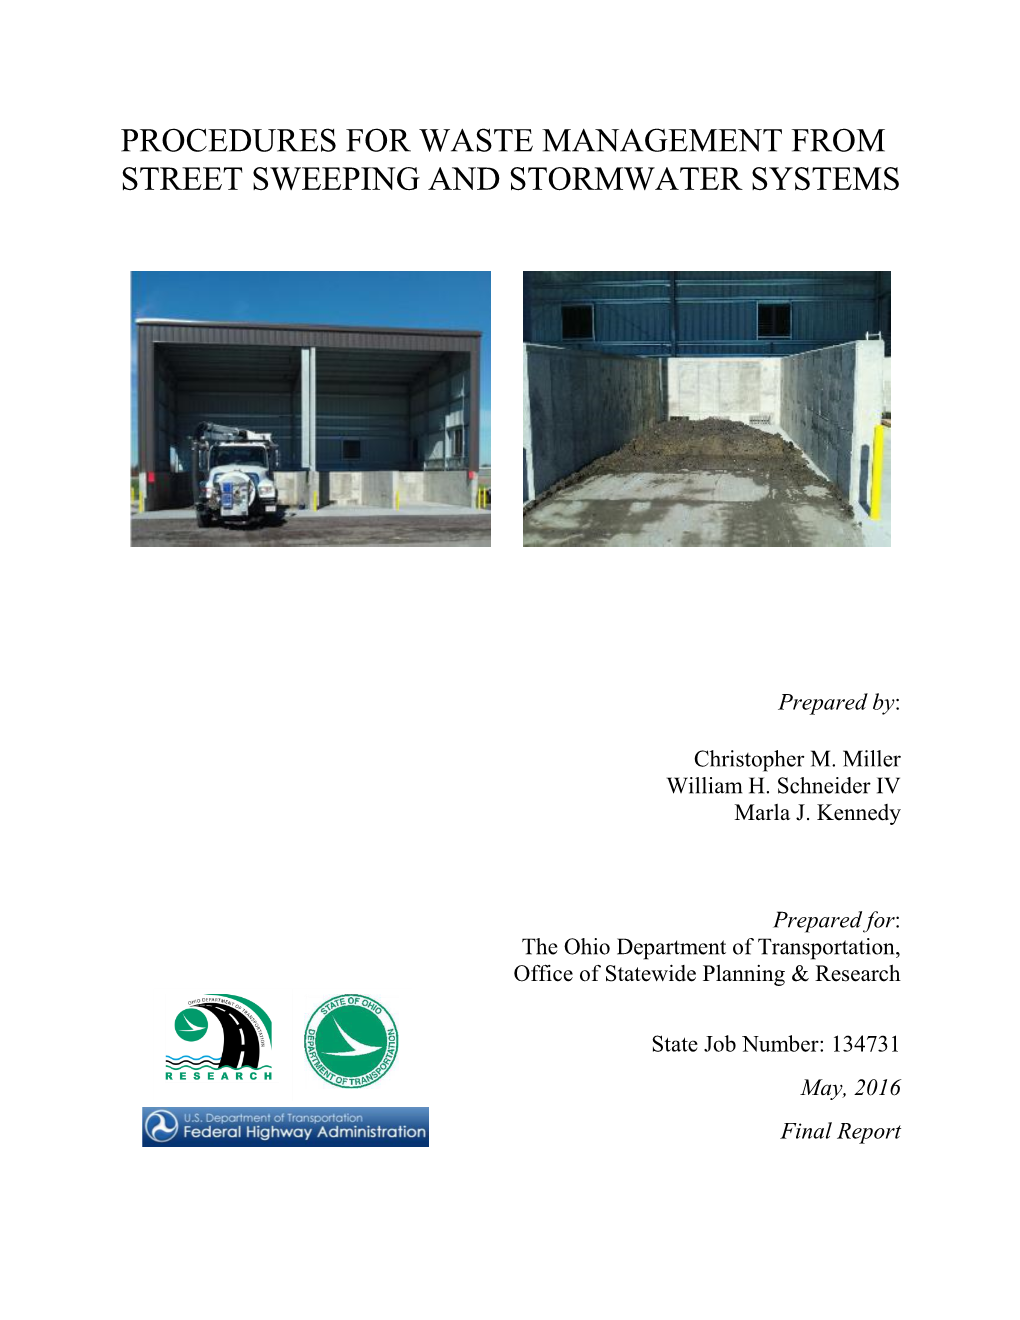 Procedures for Waste Management from Street Sweeping and Stormwater Systems